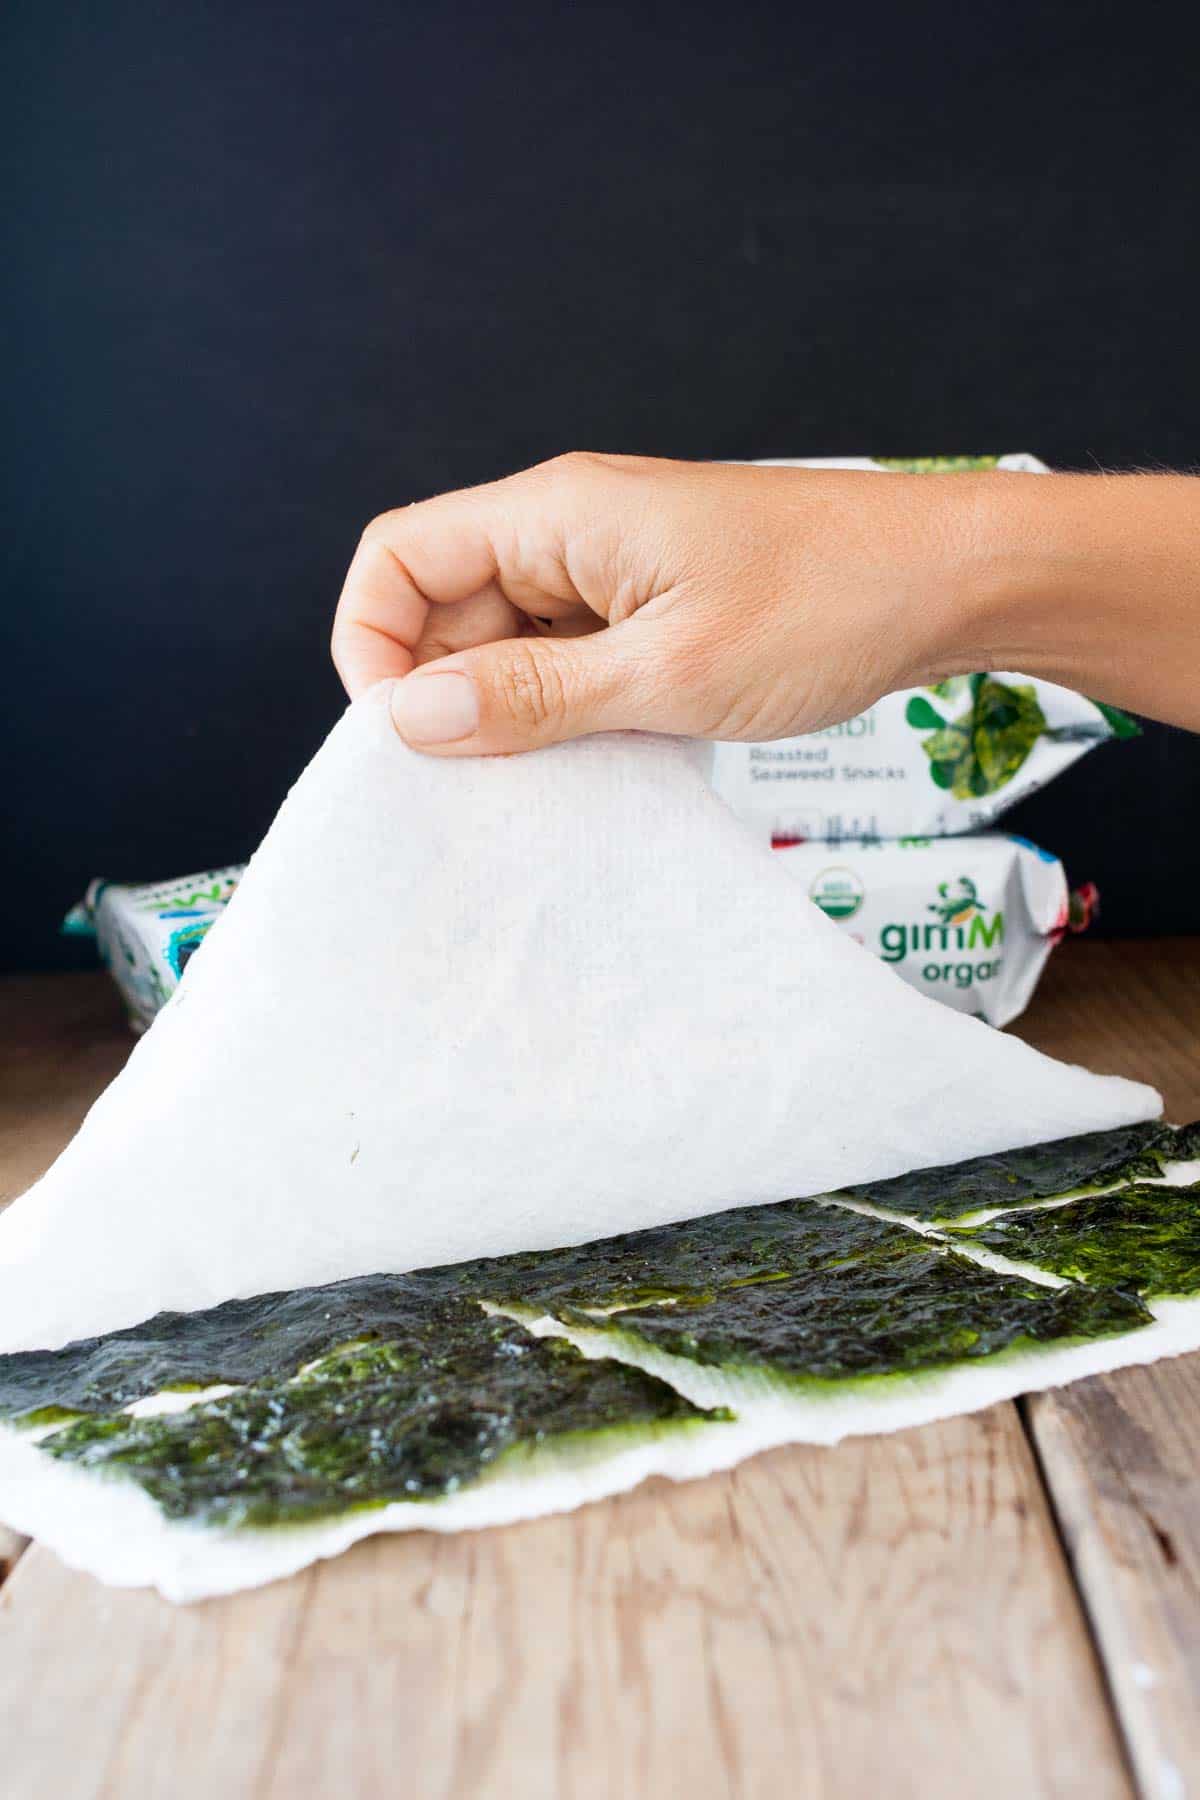 A hand lifting a paper towel over a layer of seaweed snacks lined up on another paper towel.